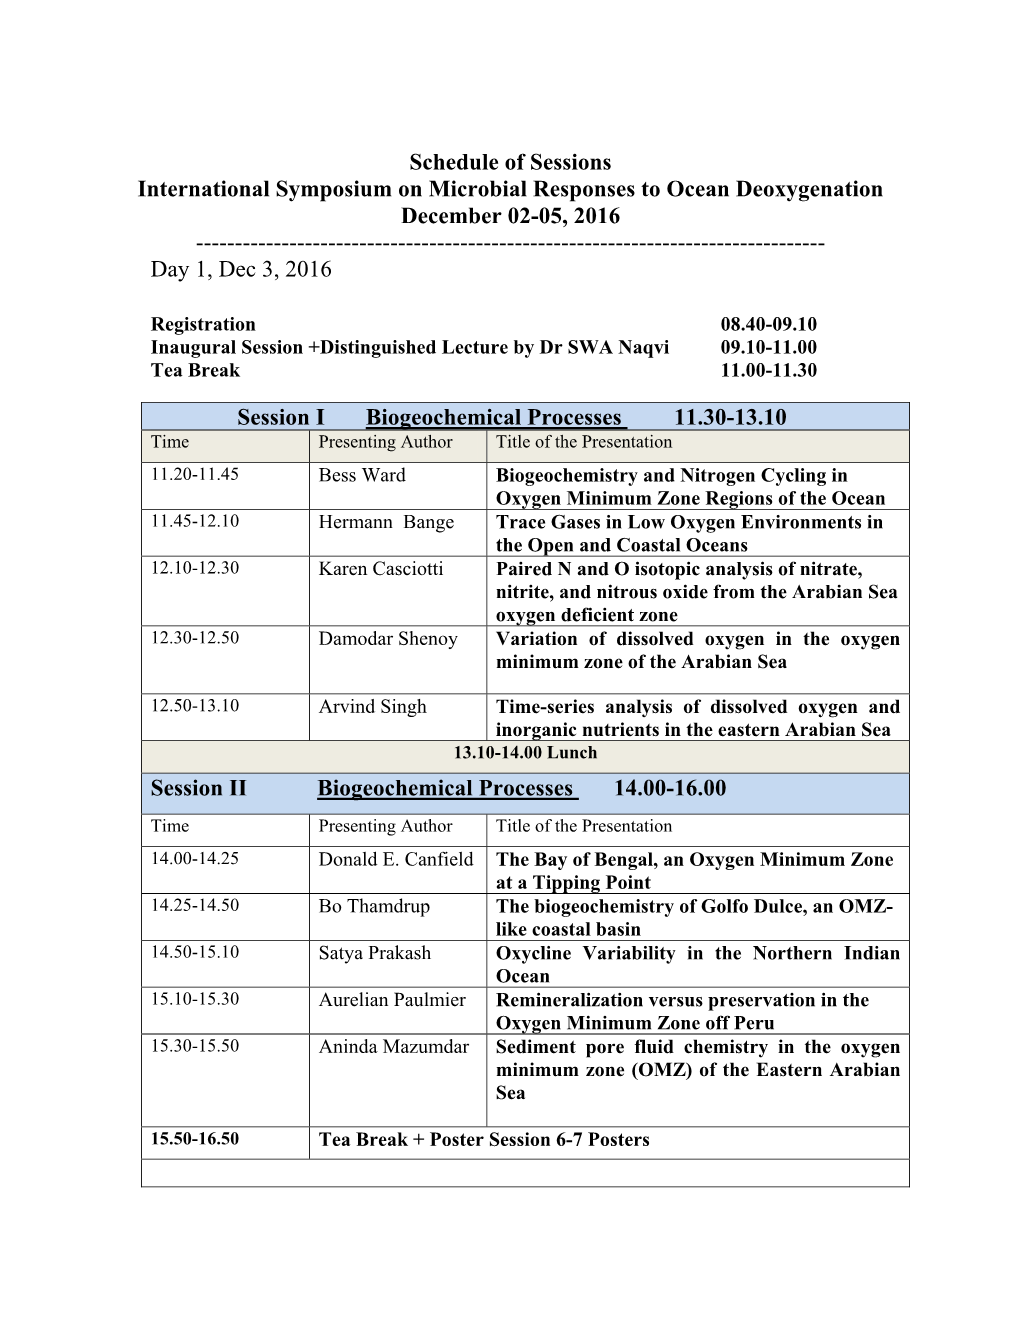 Schedule of Sessions International Symposium on Microbial Responses to Ocean Deoxygenation December 02-05, 2016 ------Day 1, Dec 3, 2016